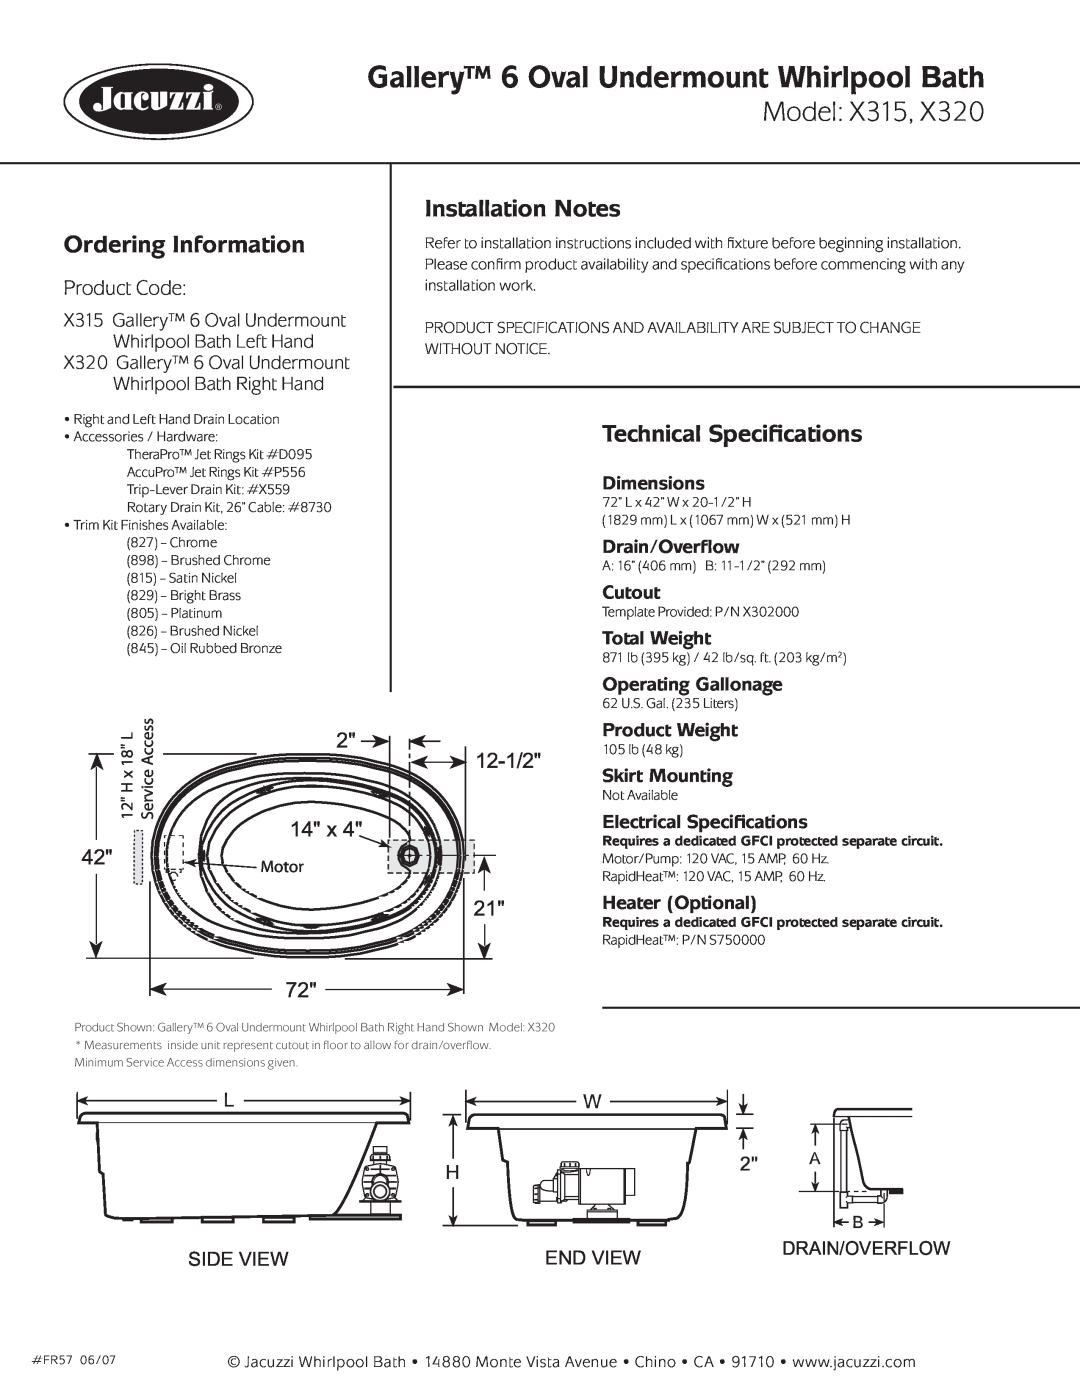 Jacuzzi X320-RH Gallery 6 Oval Undermount Whirlpool Bath, Model, Ordering Information, Installation Notes, Product Code 